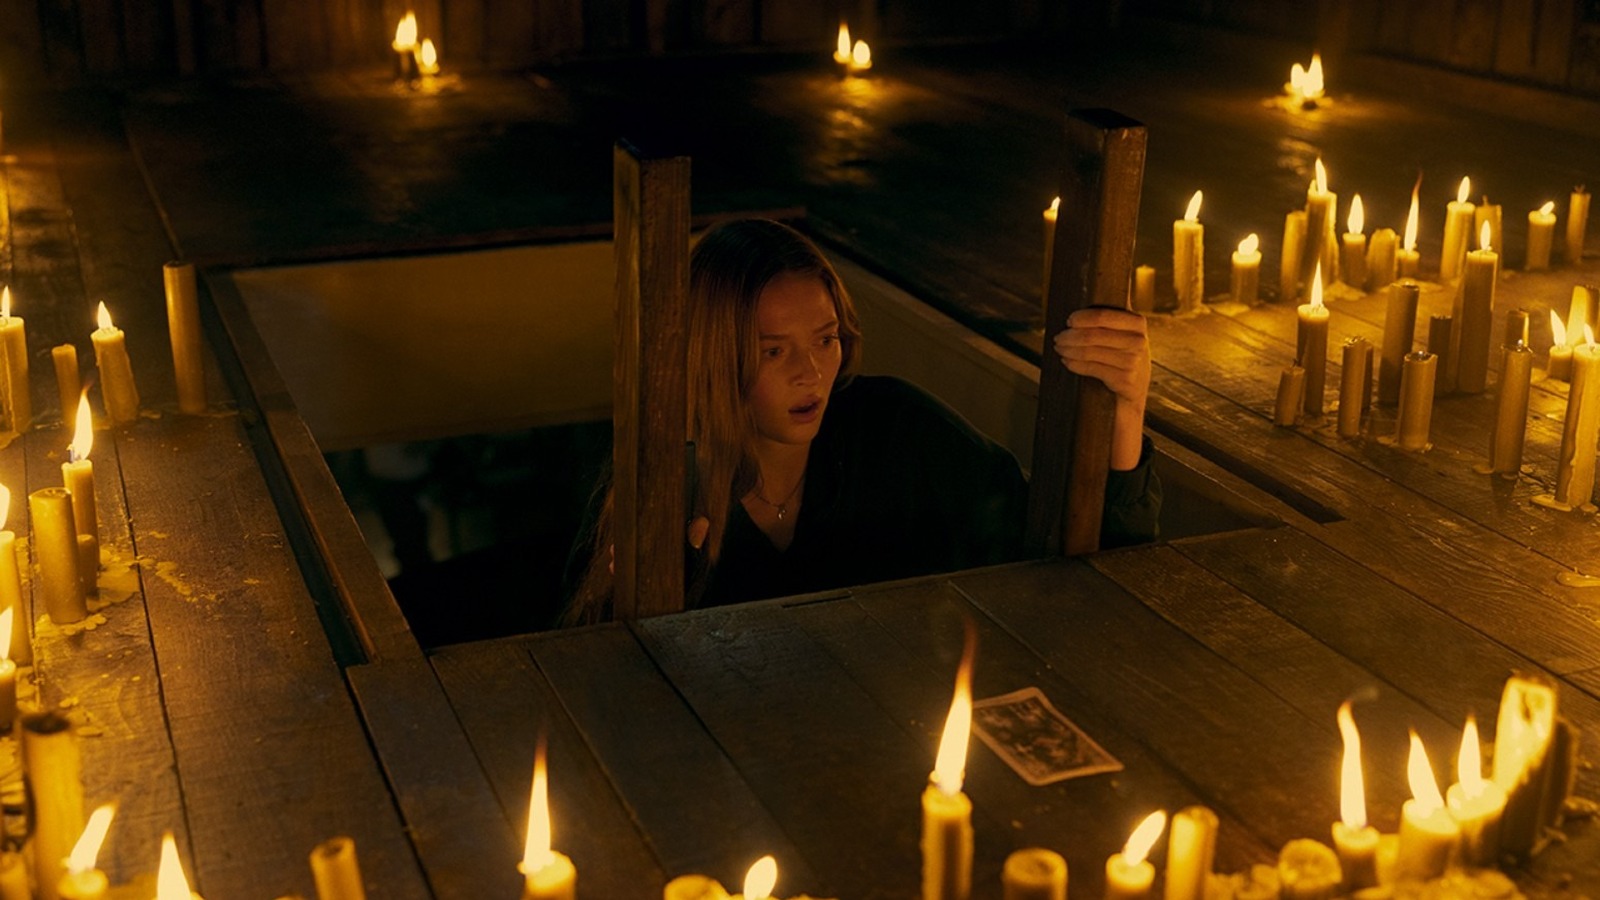 Death (And Jump Scares) Are In The Cards In Trailer For New Horror Movie Tarot